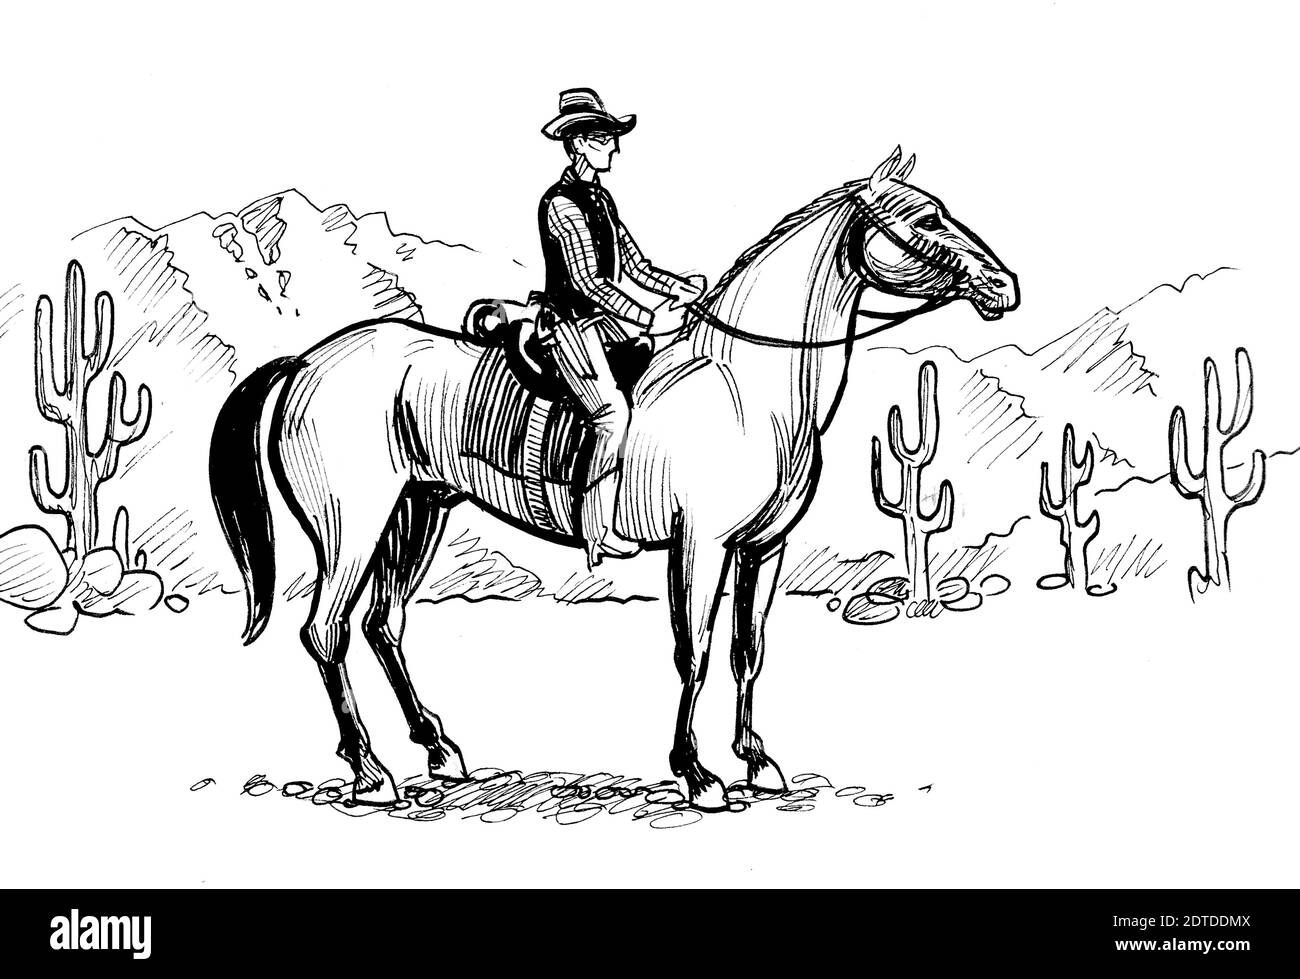 Mexican cowboy in black Cut Out Stock Images & Pictures - Alamy